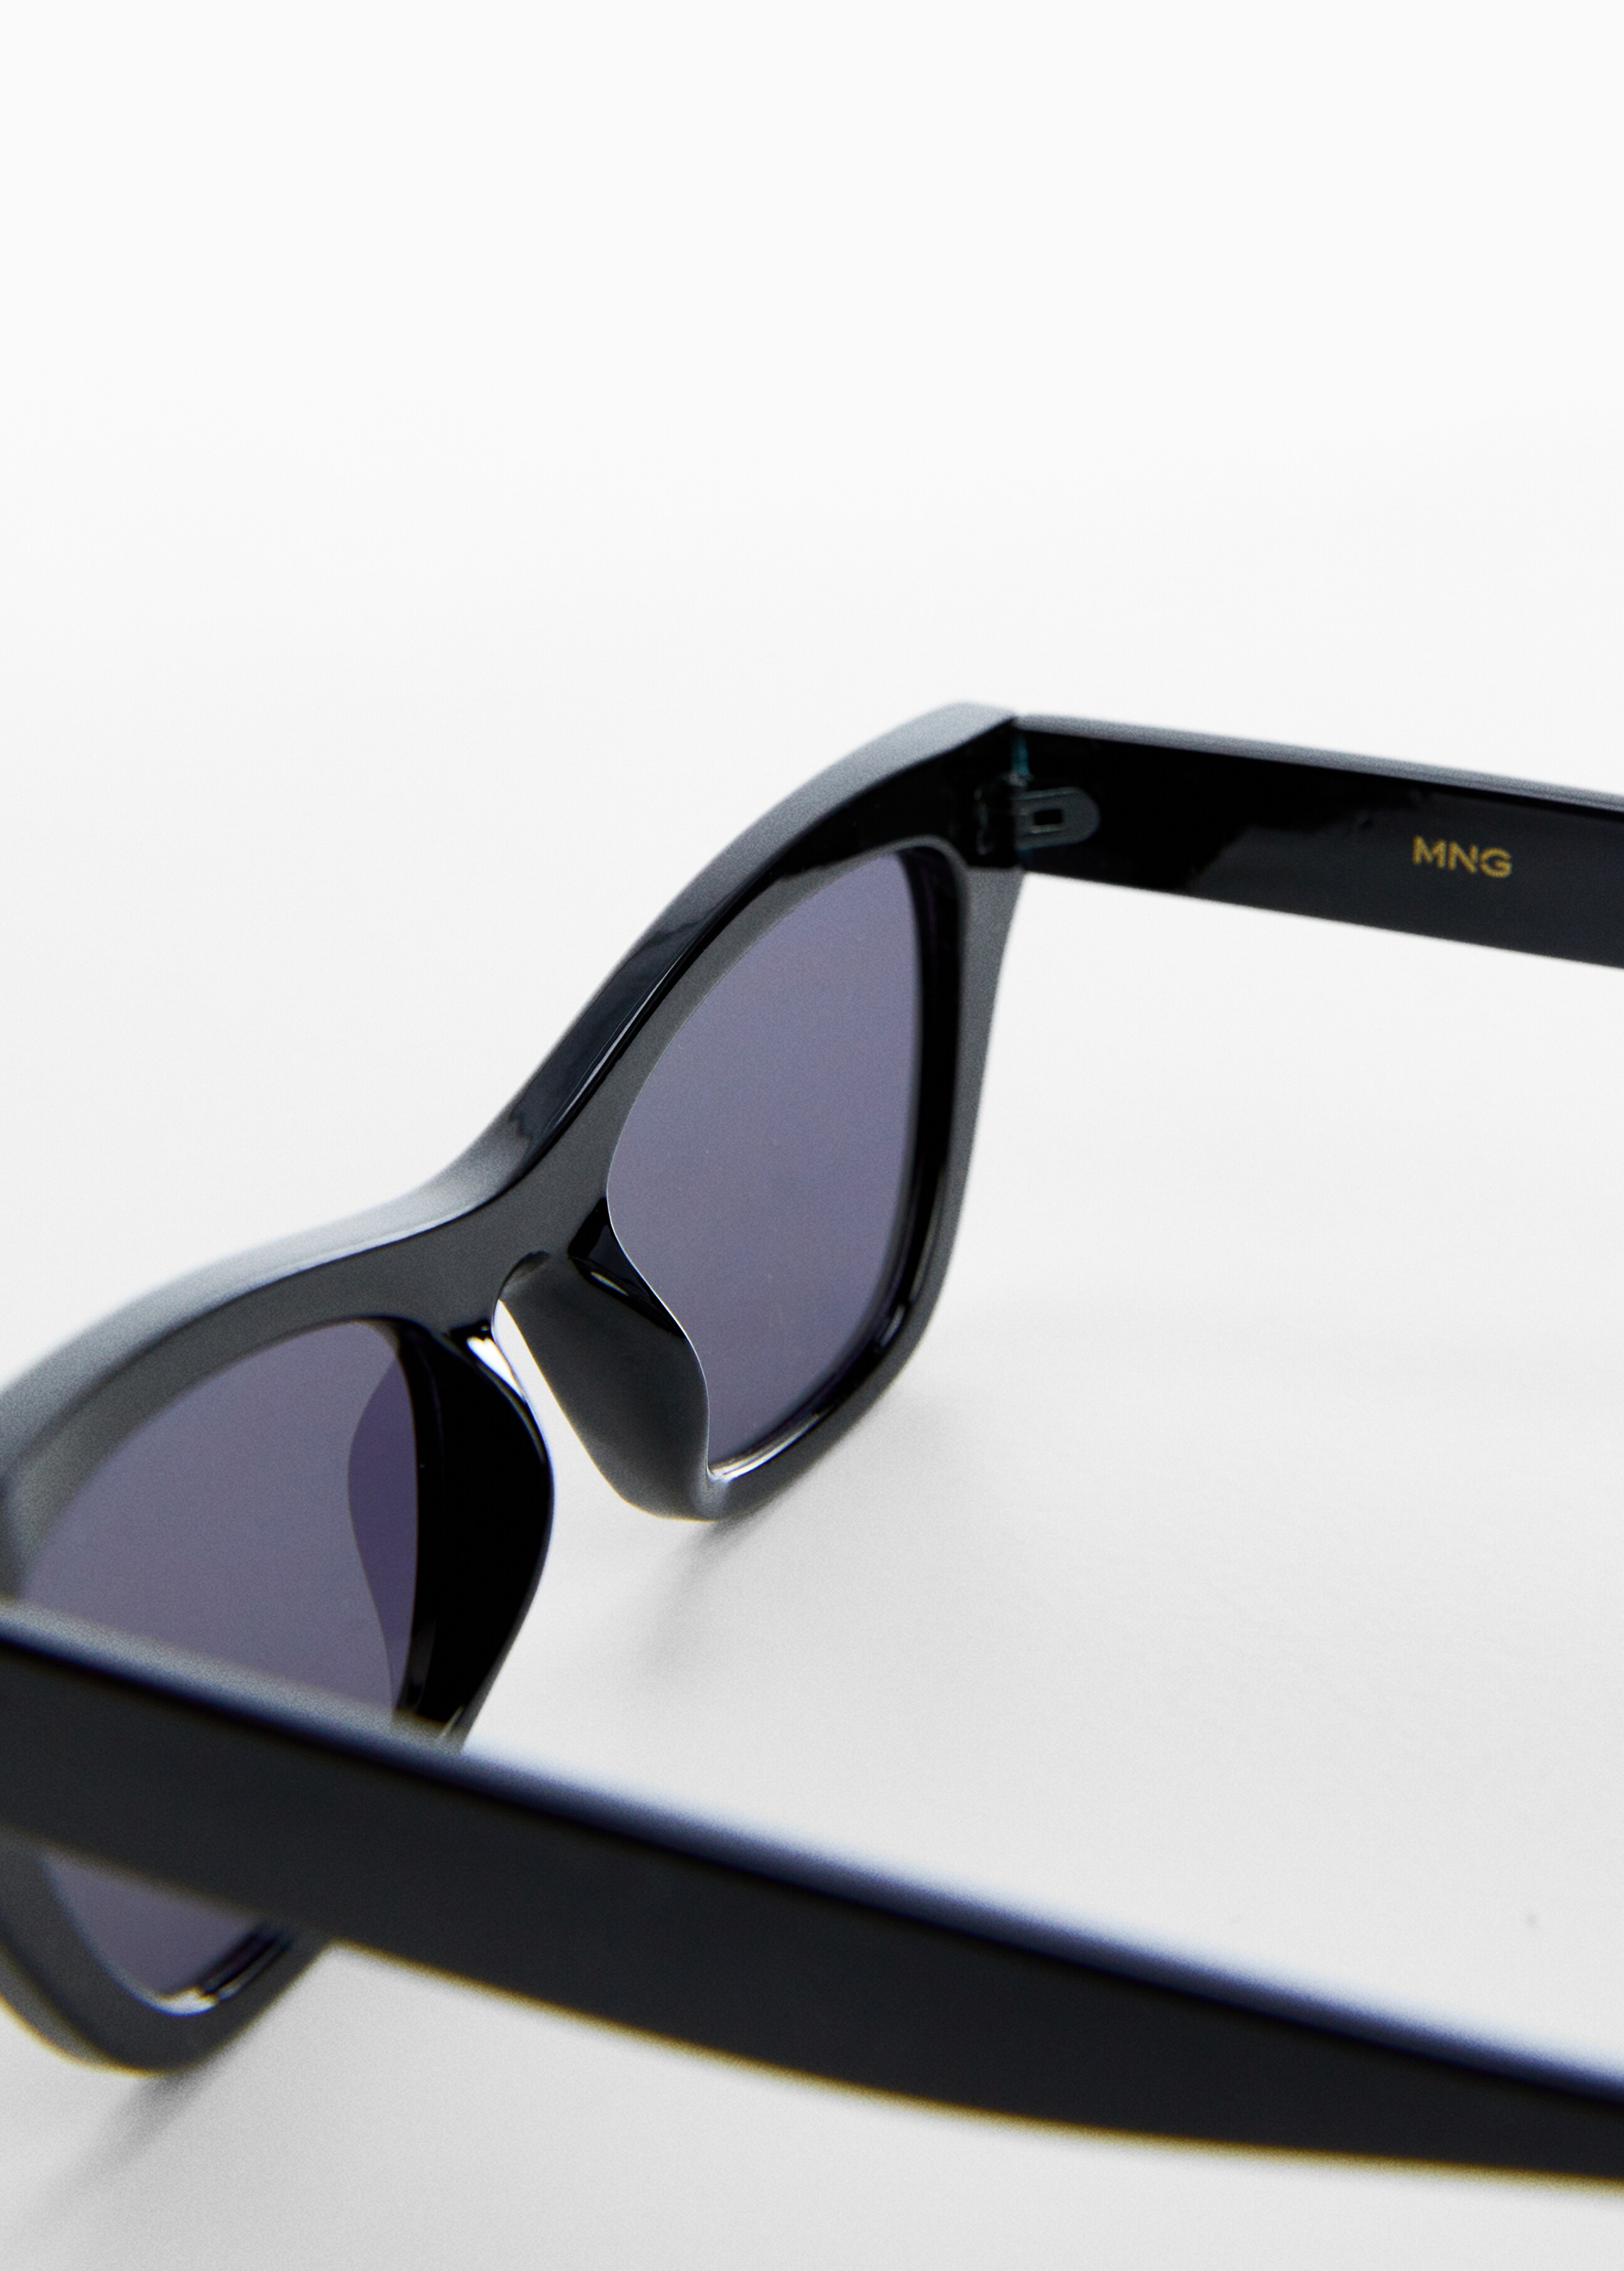 Cat-eye sunglasses - Details of the article 1